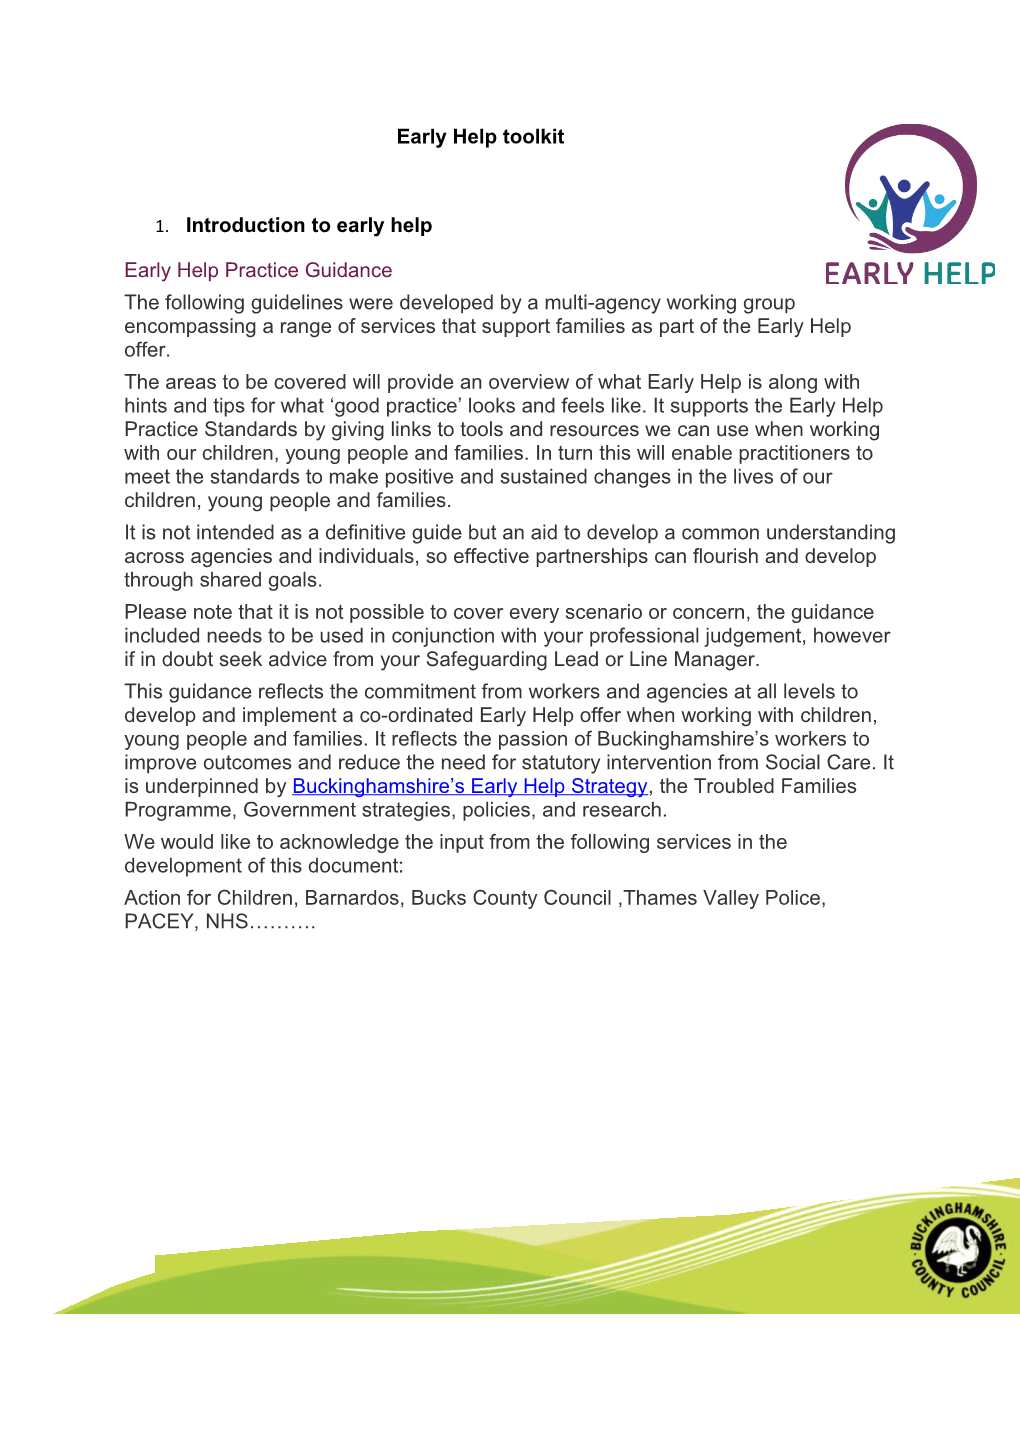 Early Help Practice Guidance